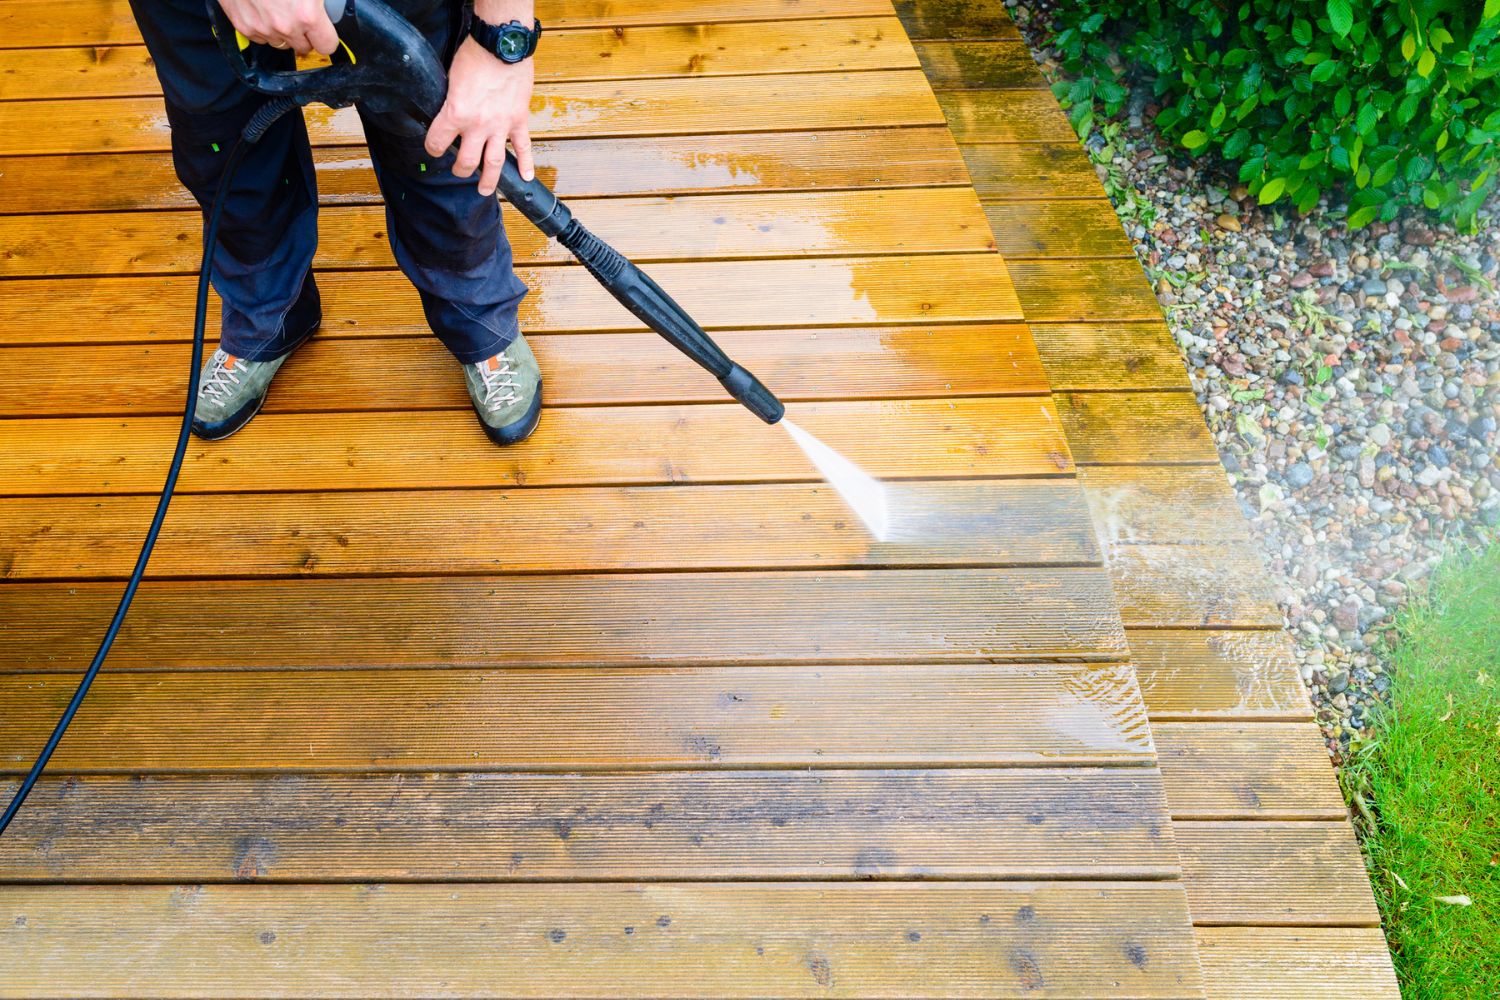 How to Start a Pressure-Washing Business in 11 Steps